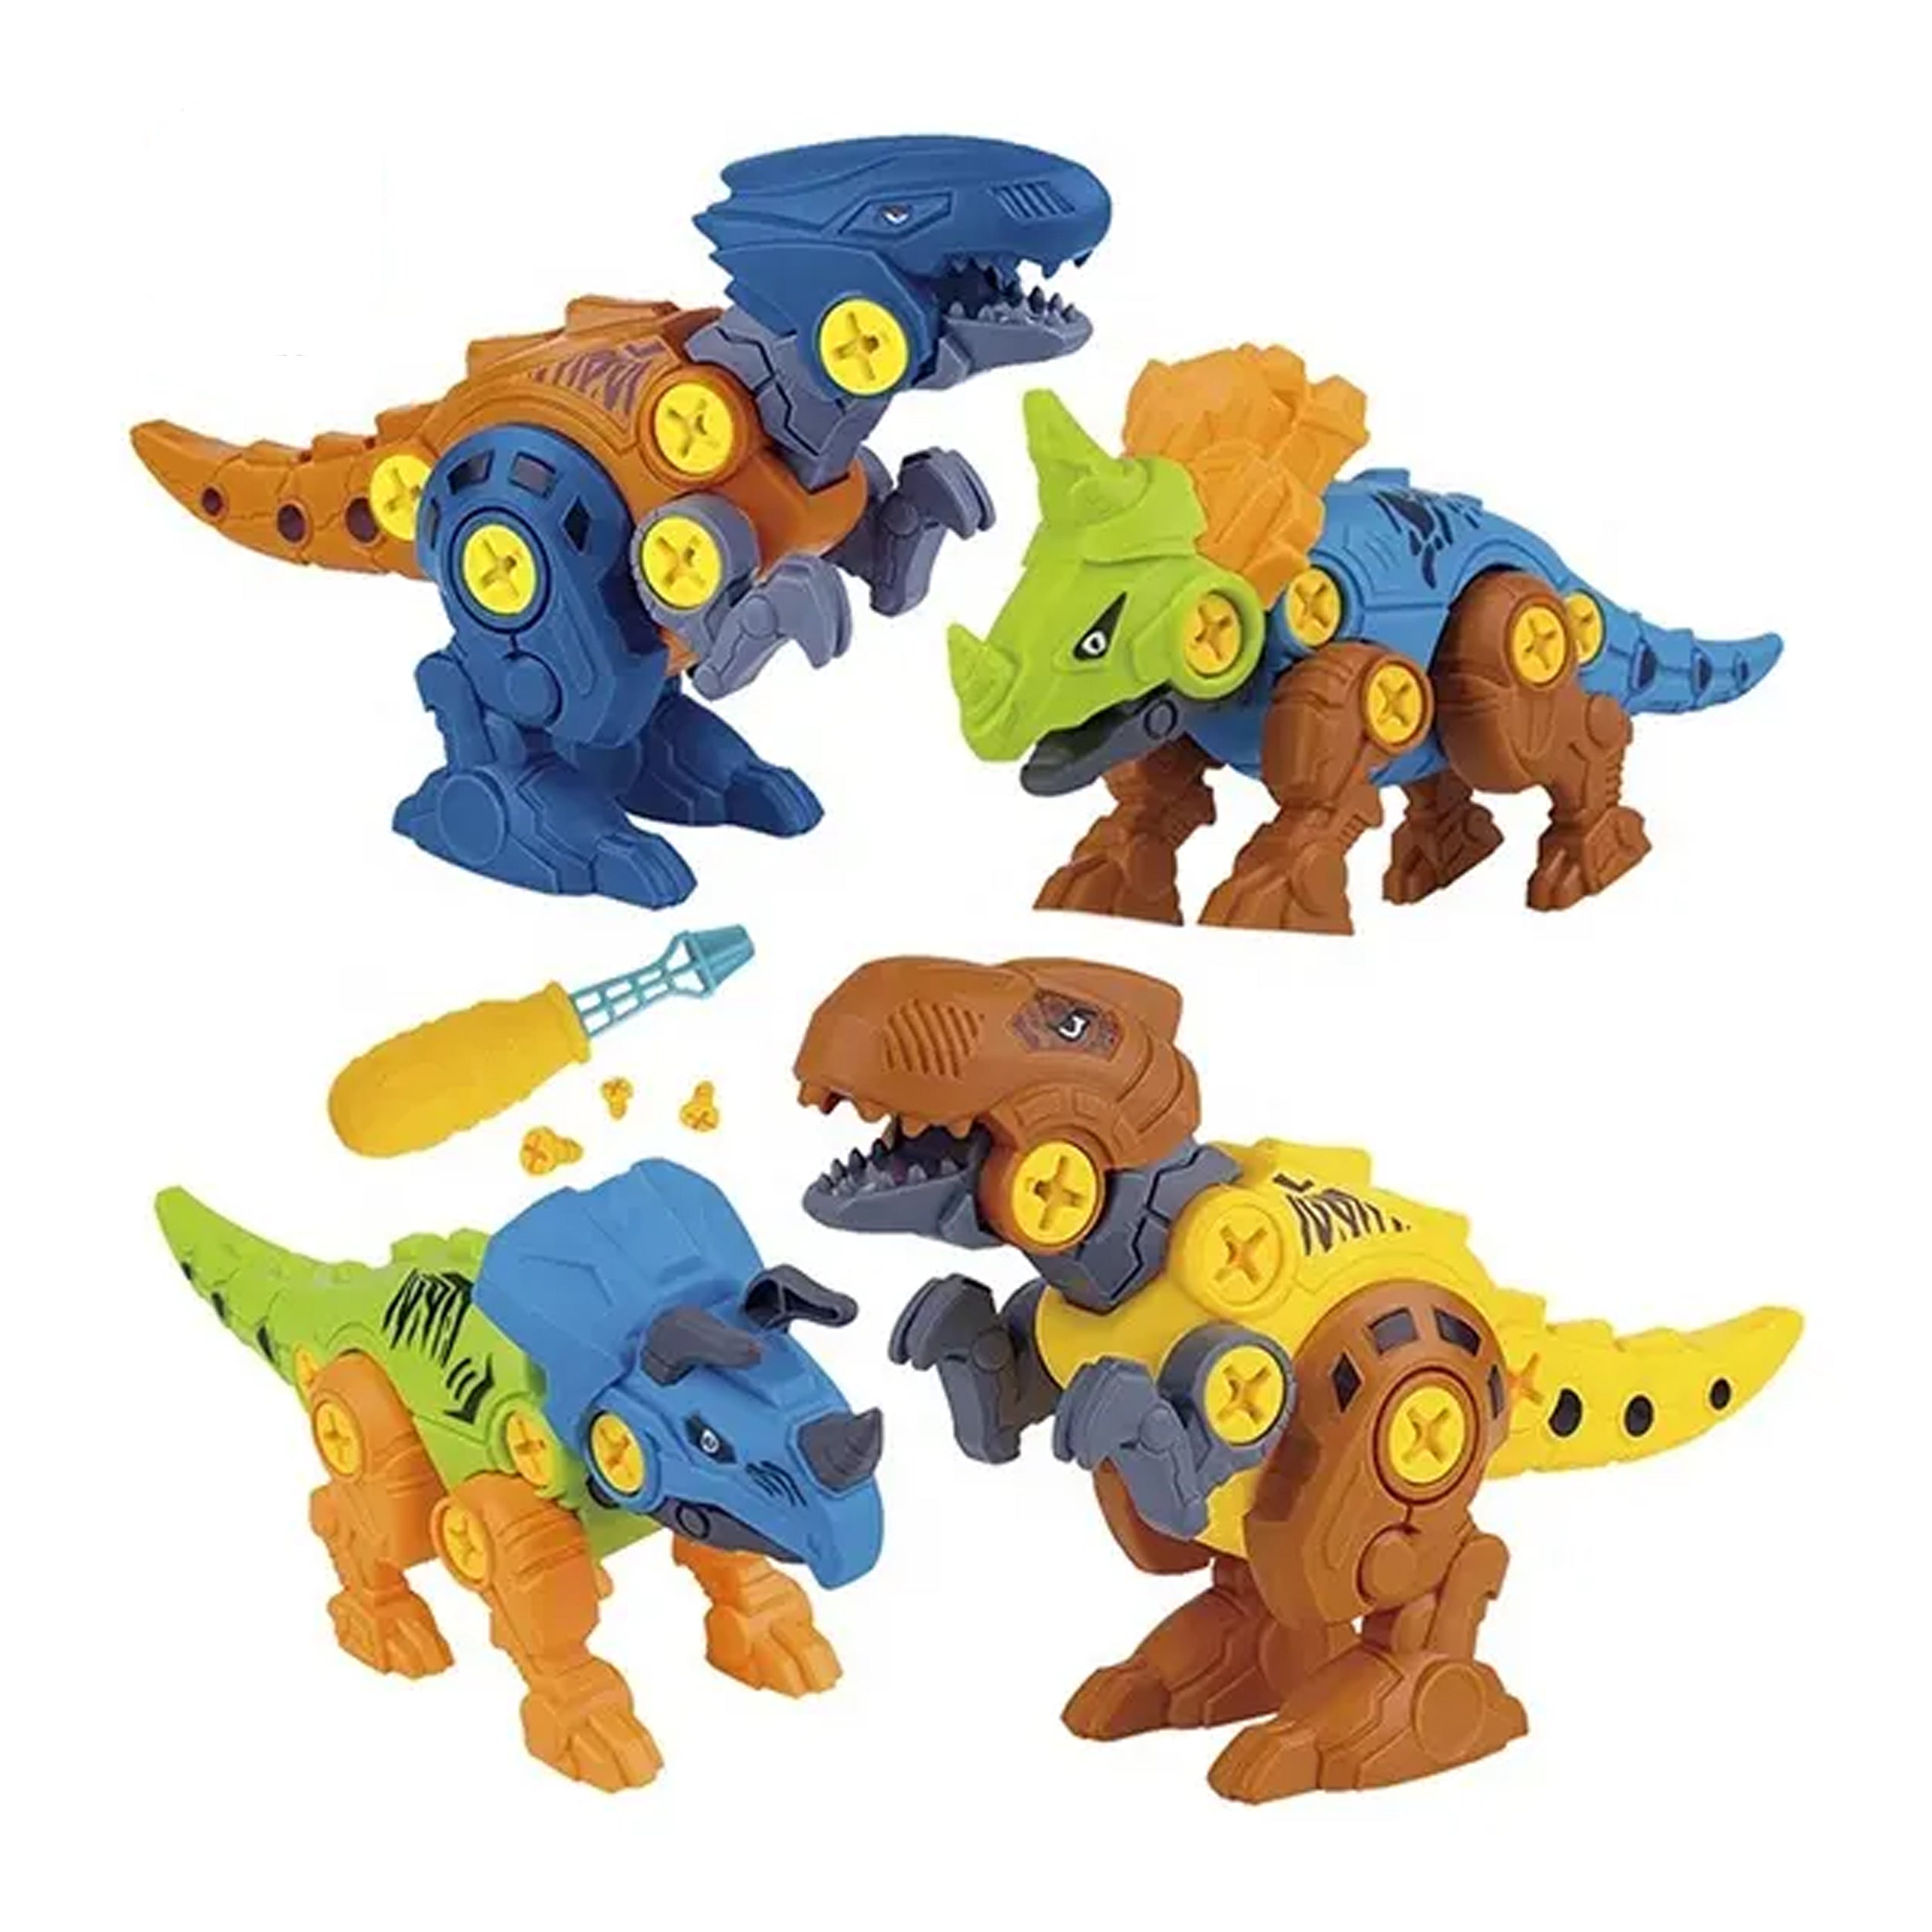 Dinosaur Toy with Drill Assembly - A Fun and Interactive Playset for Kids